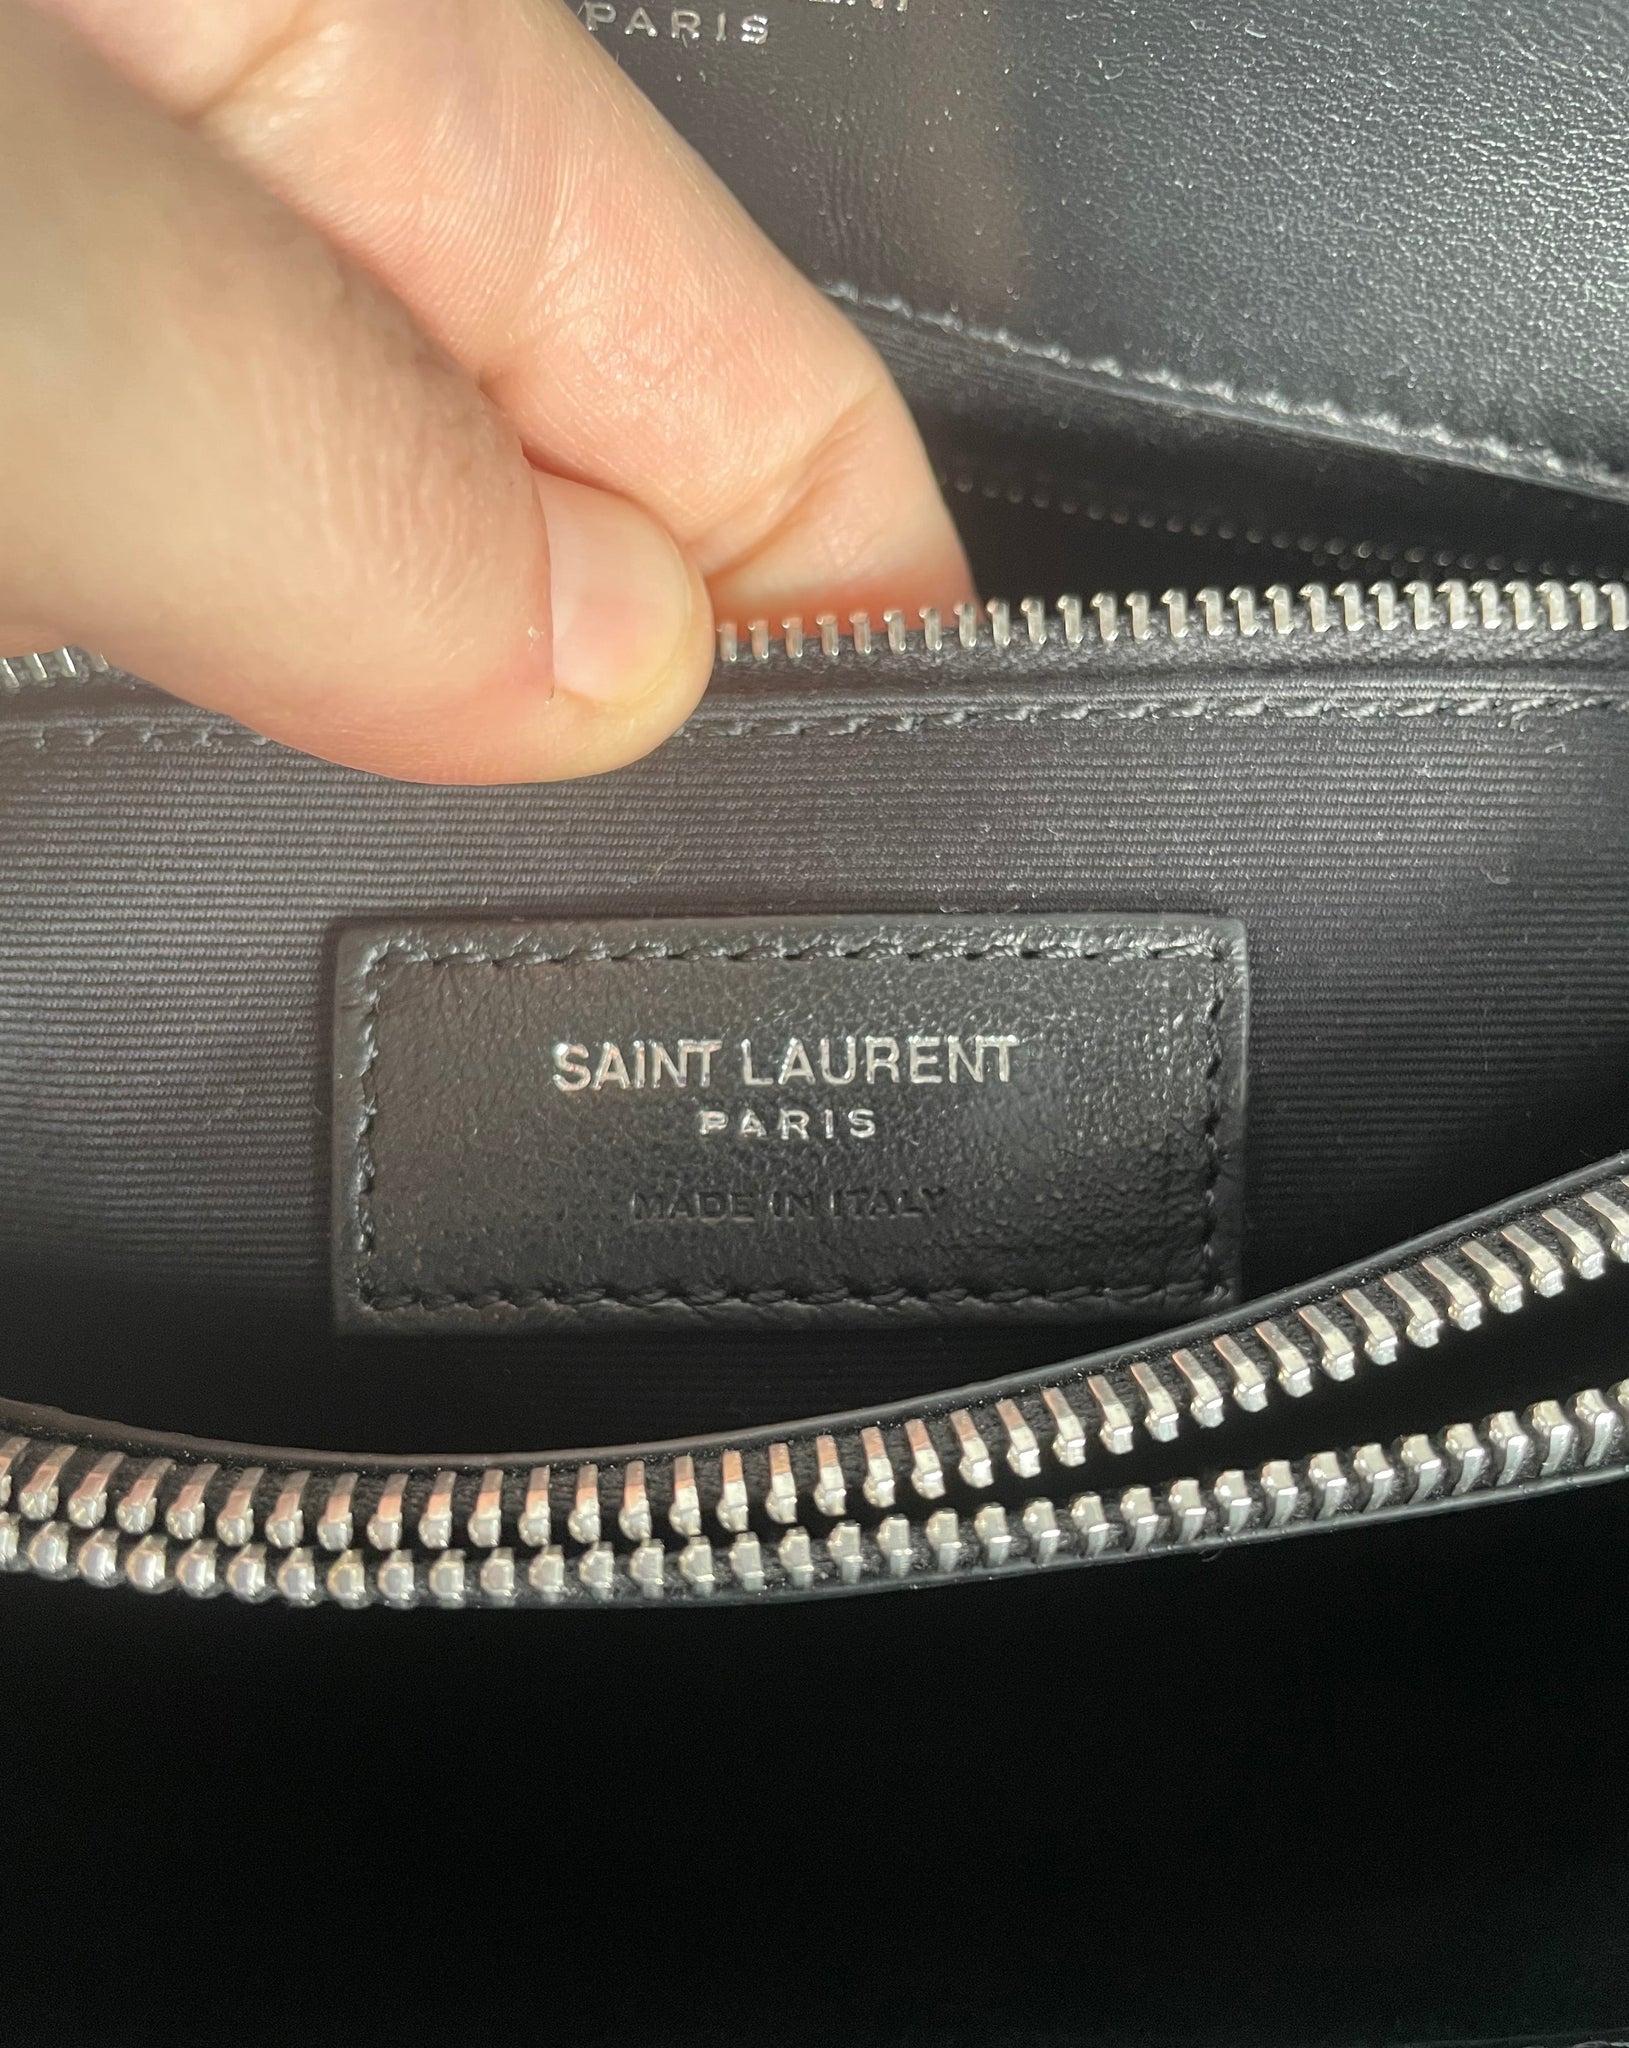 YSL Black LouLou Document Clutch Silver Hardware. Made in Italy. With care  cards, dustbag & certificate of authenticity from ENTRUPY ❤️ - Canon E-Bags  Prime